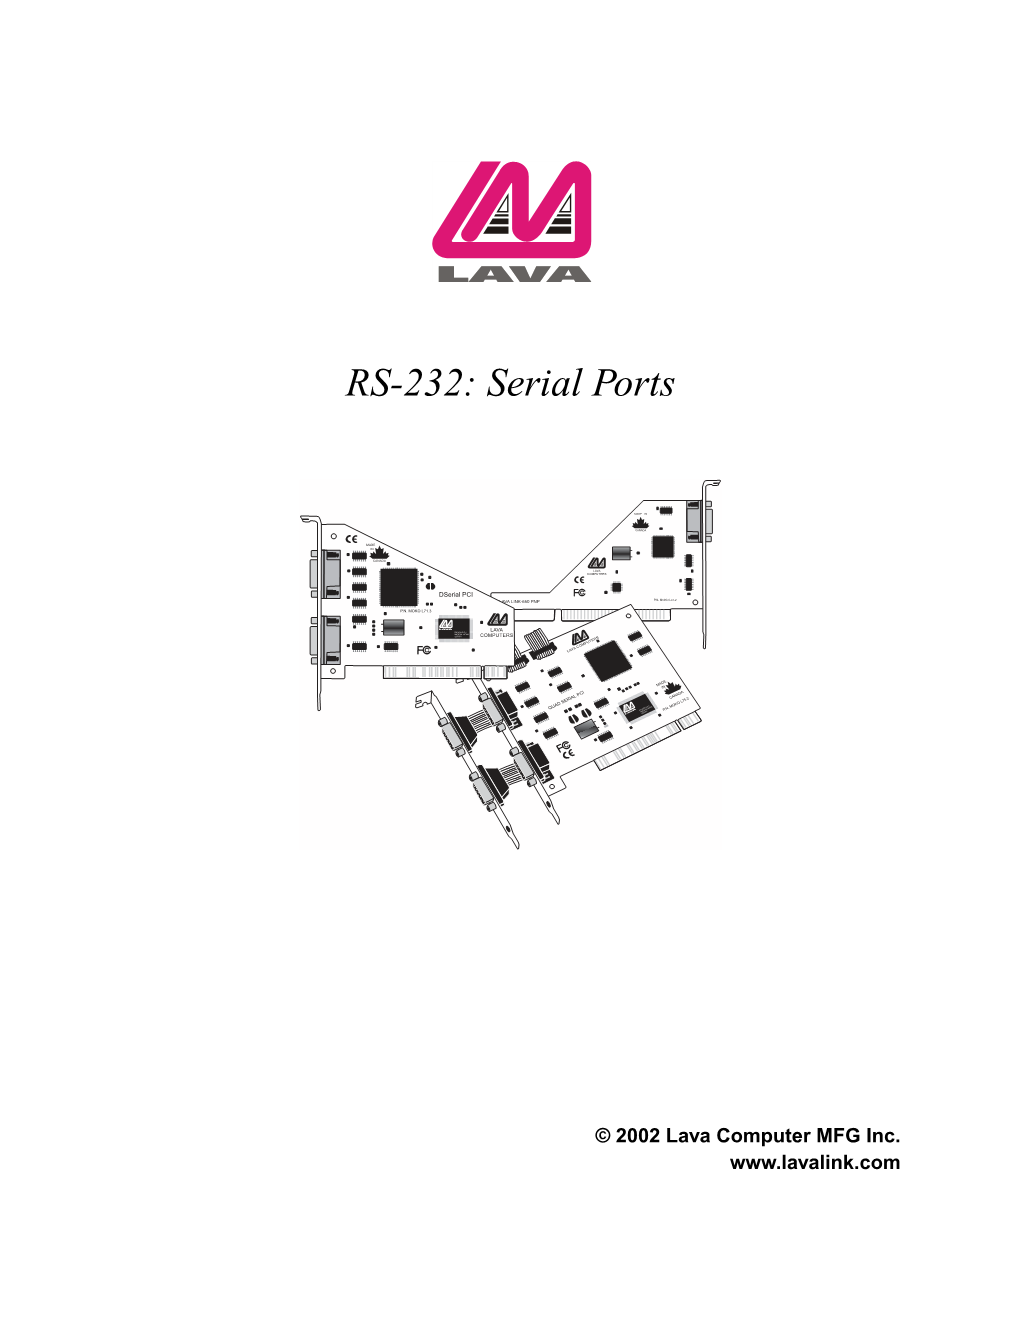 RS-232 Serial Ports